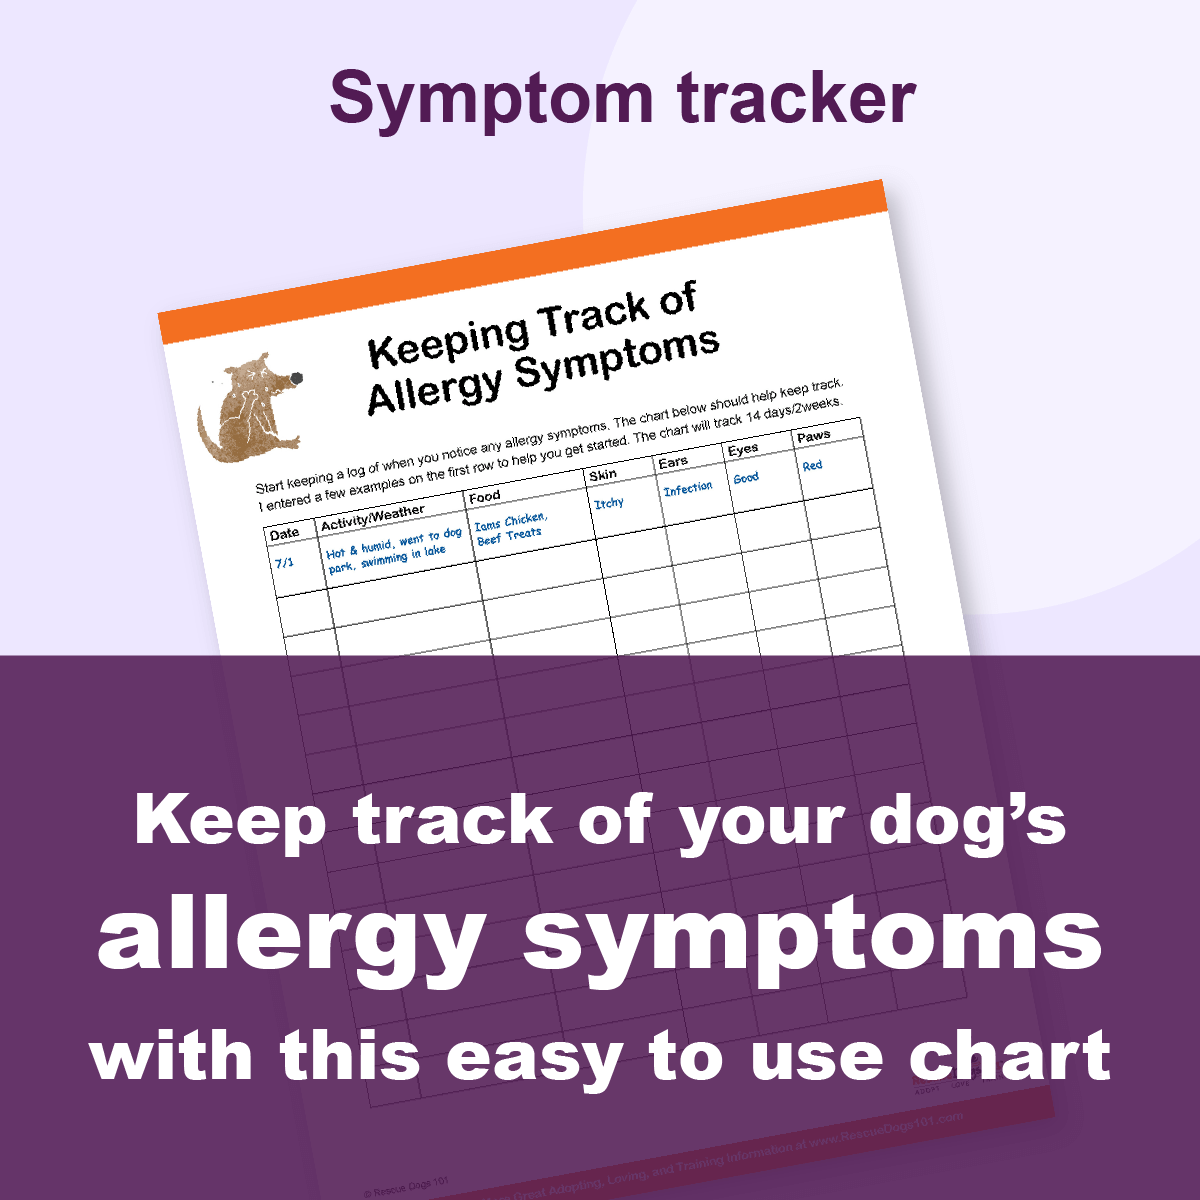 Keep track of dog's allergy symptoms chart